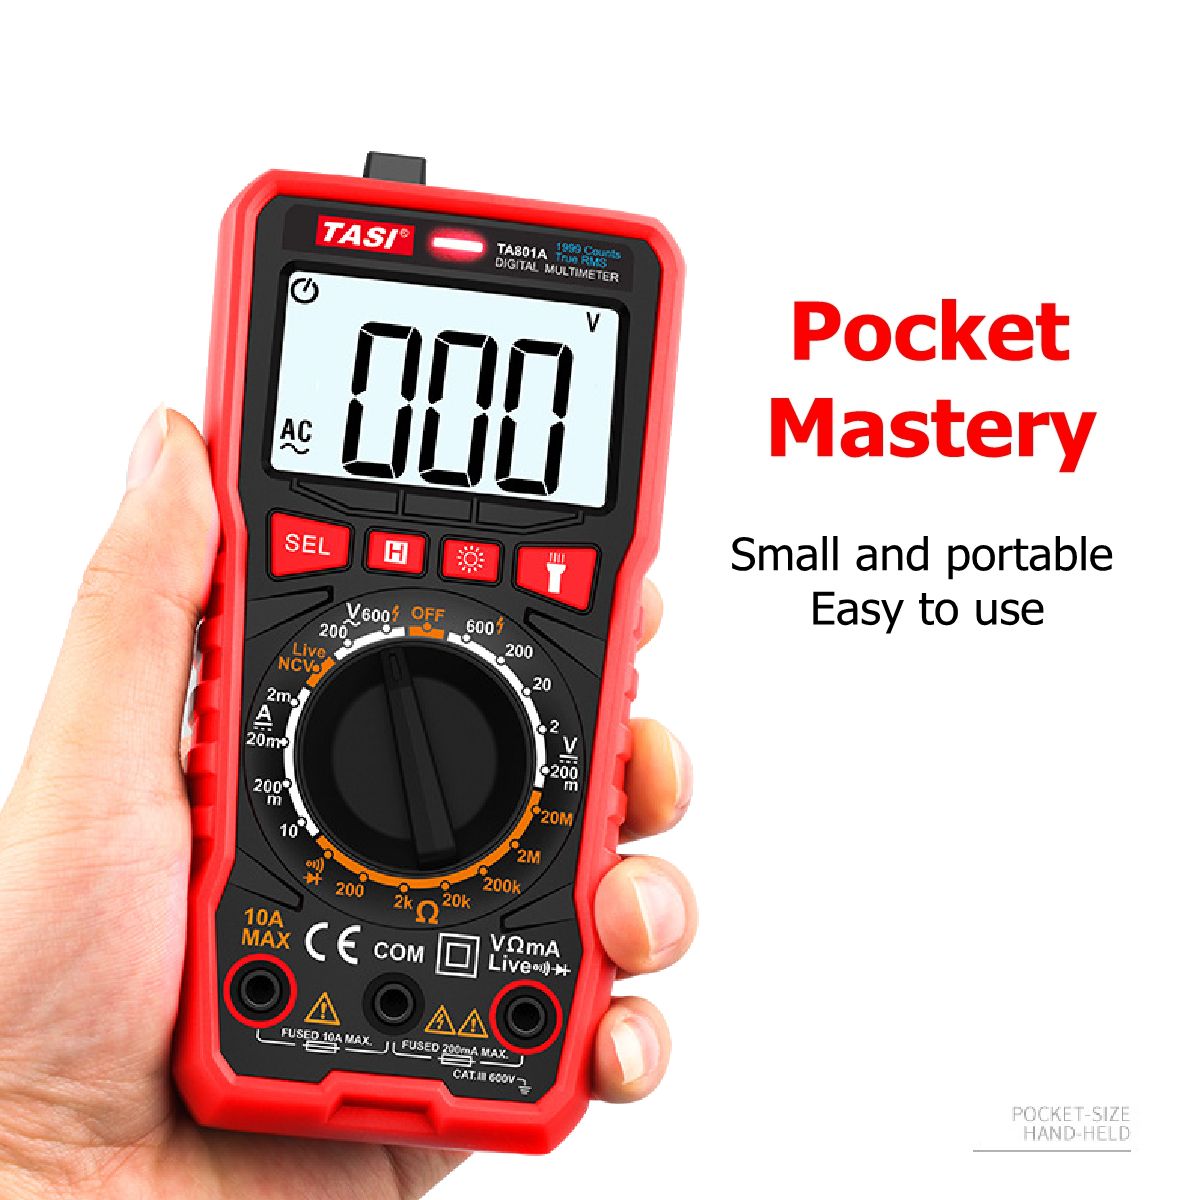 TA801A-Multimeter-High-Precision-Manual-Digital-Ammeter-Table--AC-and-DC-Universal-Multifunction-1530115